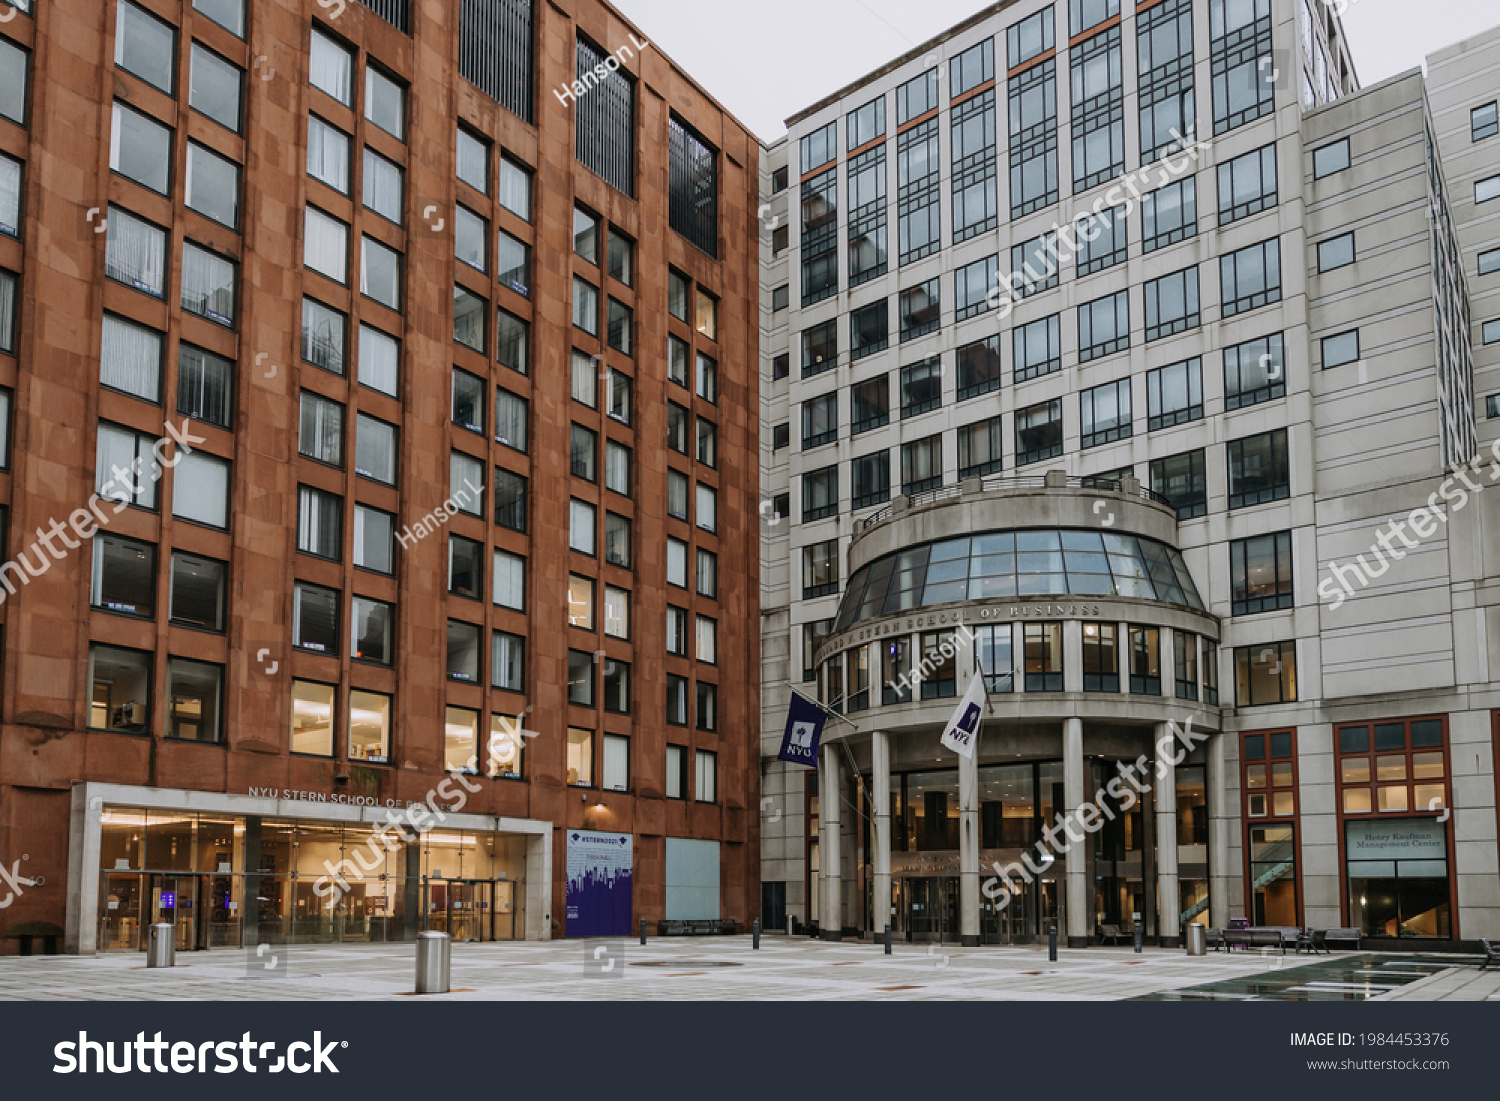 Nyu stern school of business Images, Stock Photos & Vectors | Shutterstock